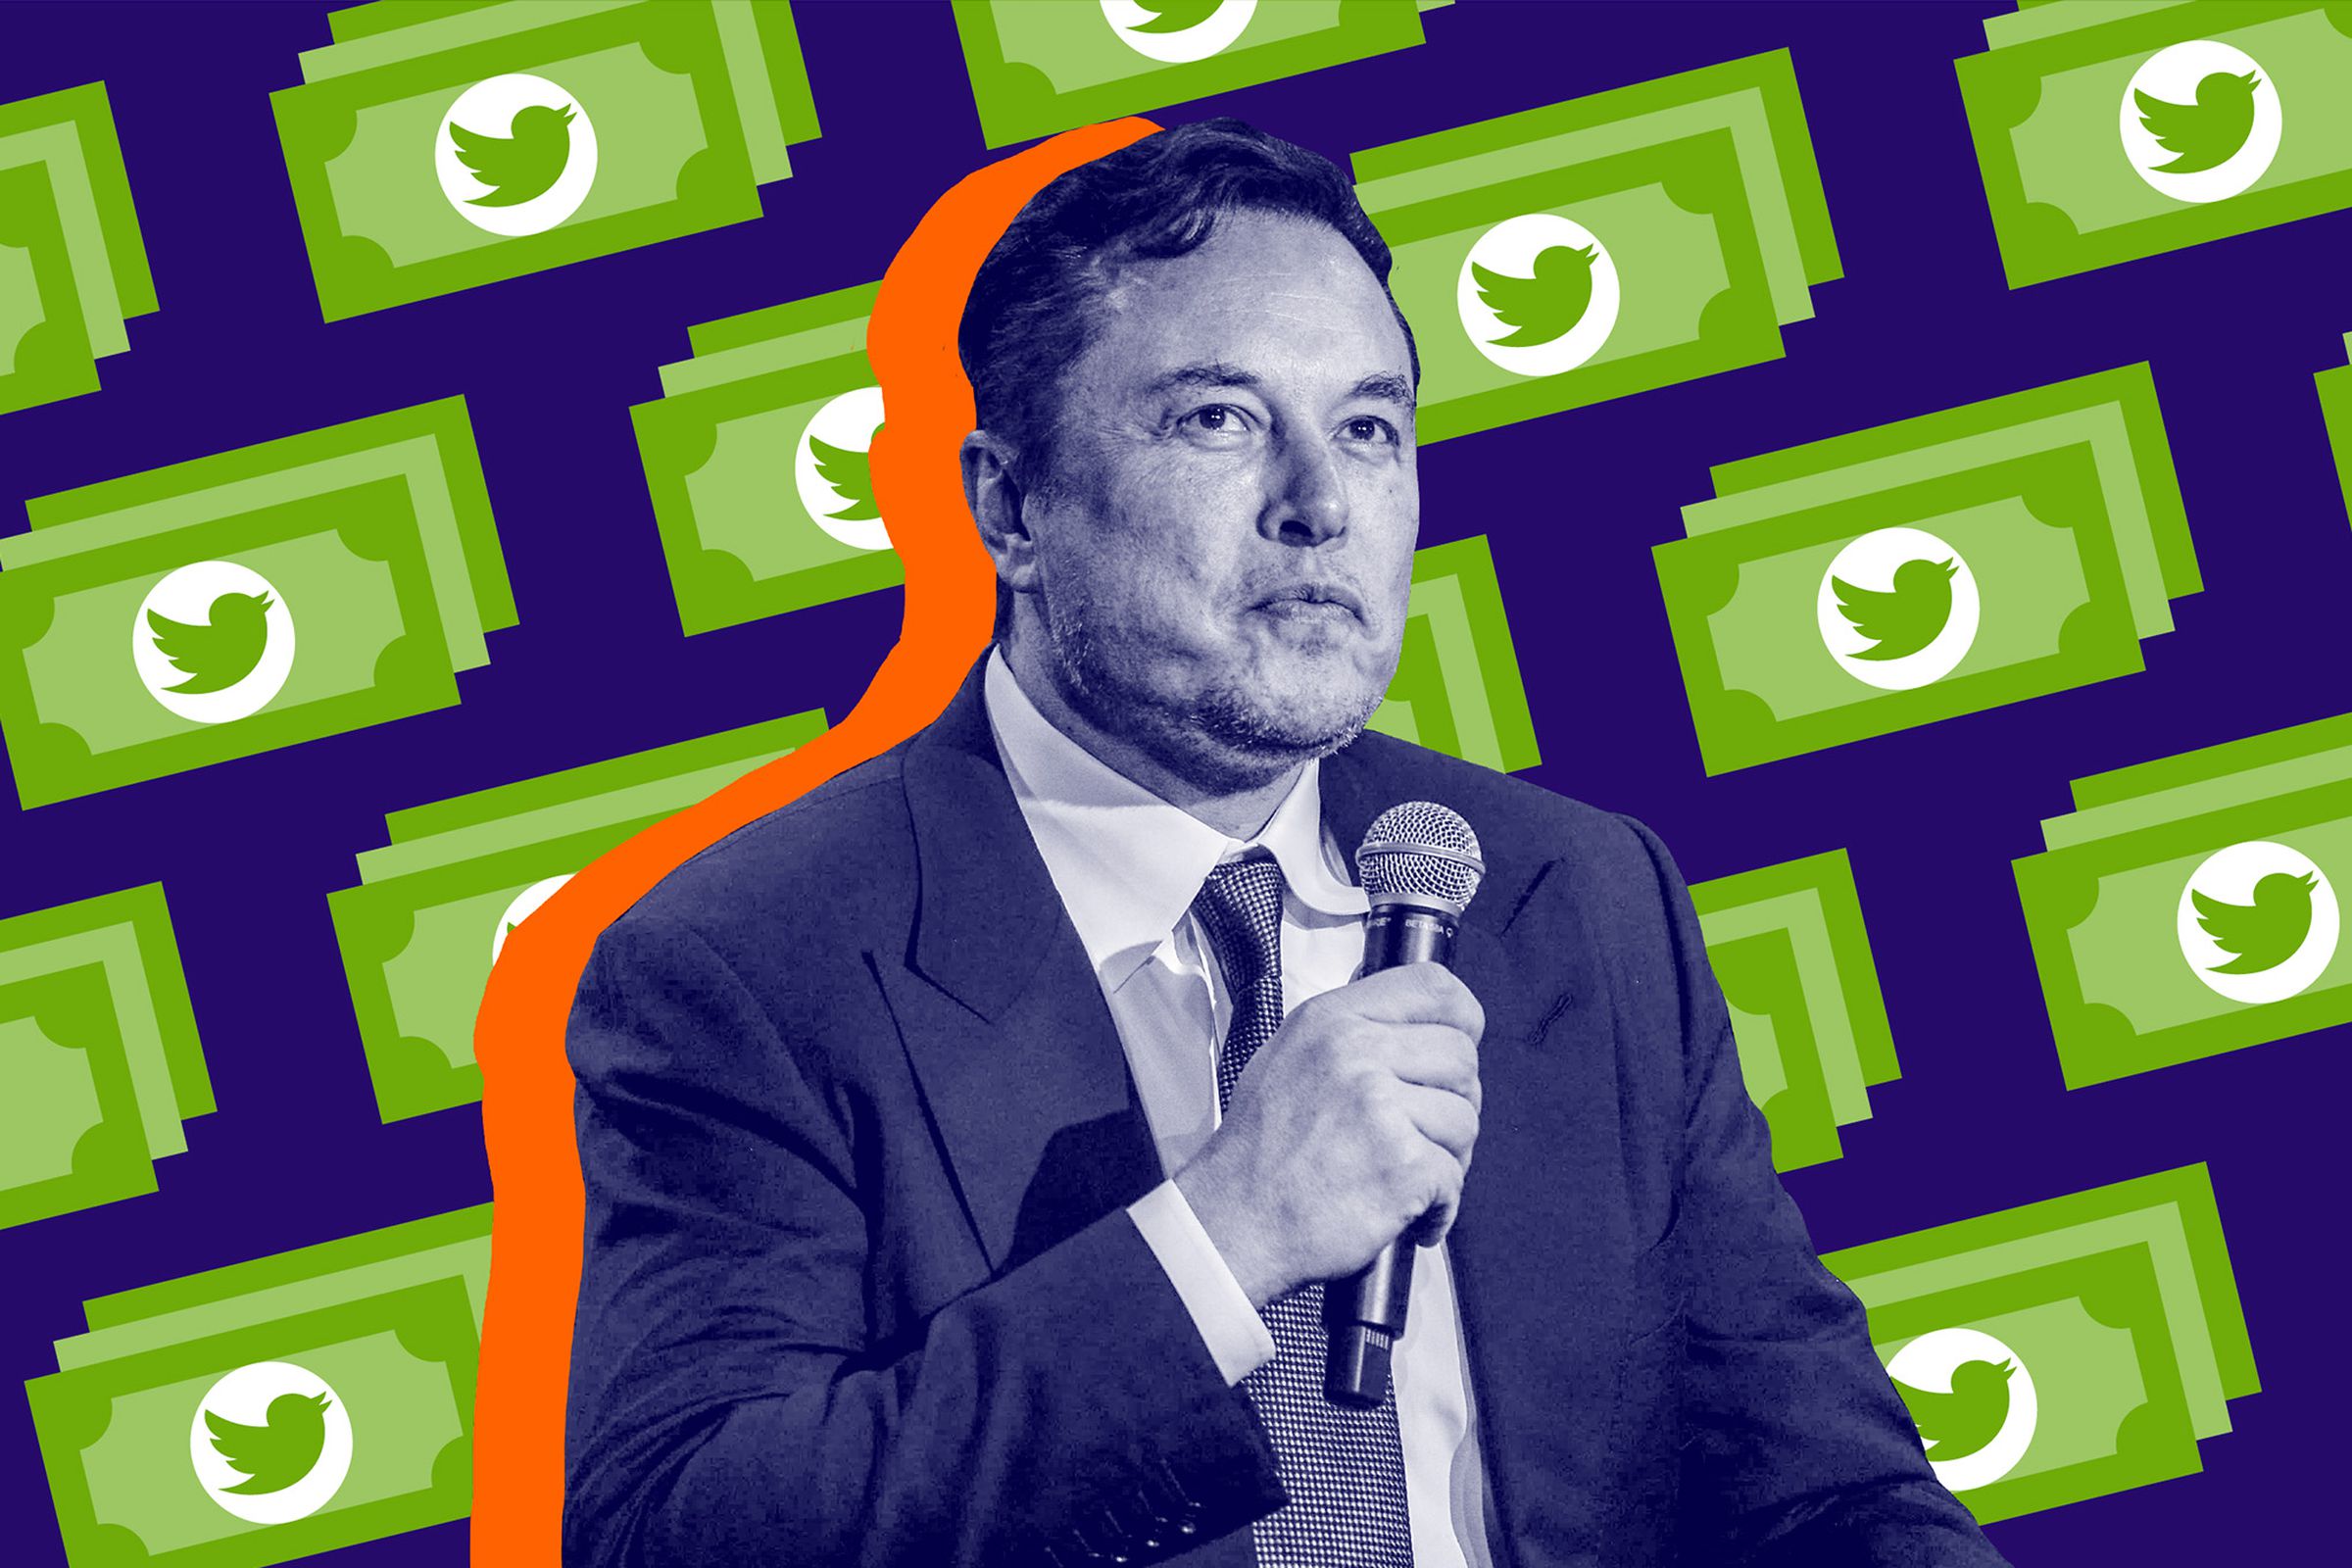 Illustration of Elon Musk with stacks of money in the background, adorned with Twitter logos